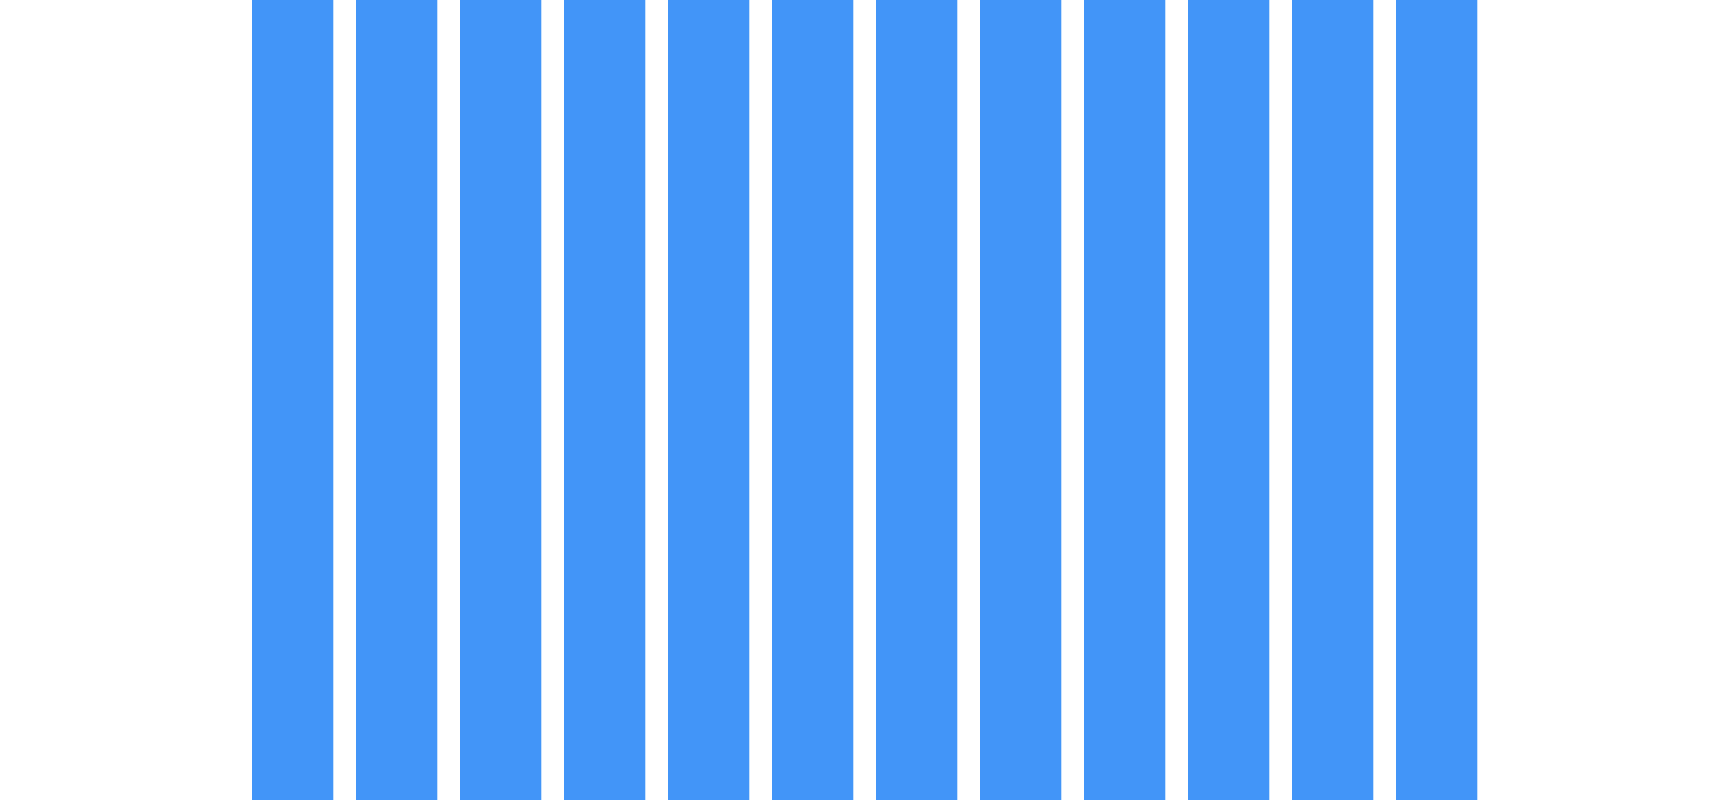 A grid that has a max width of 1280.